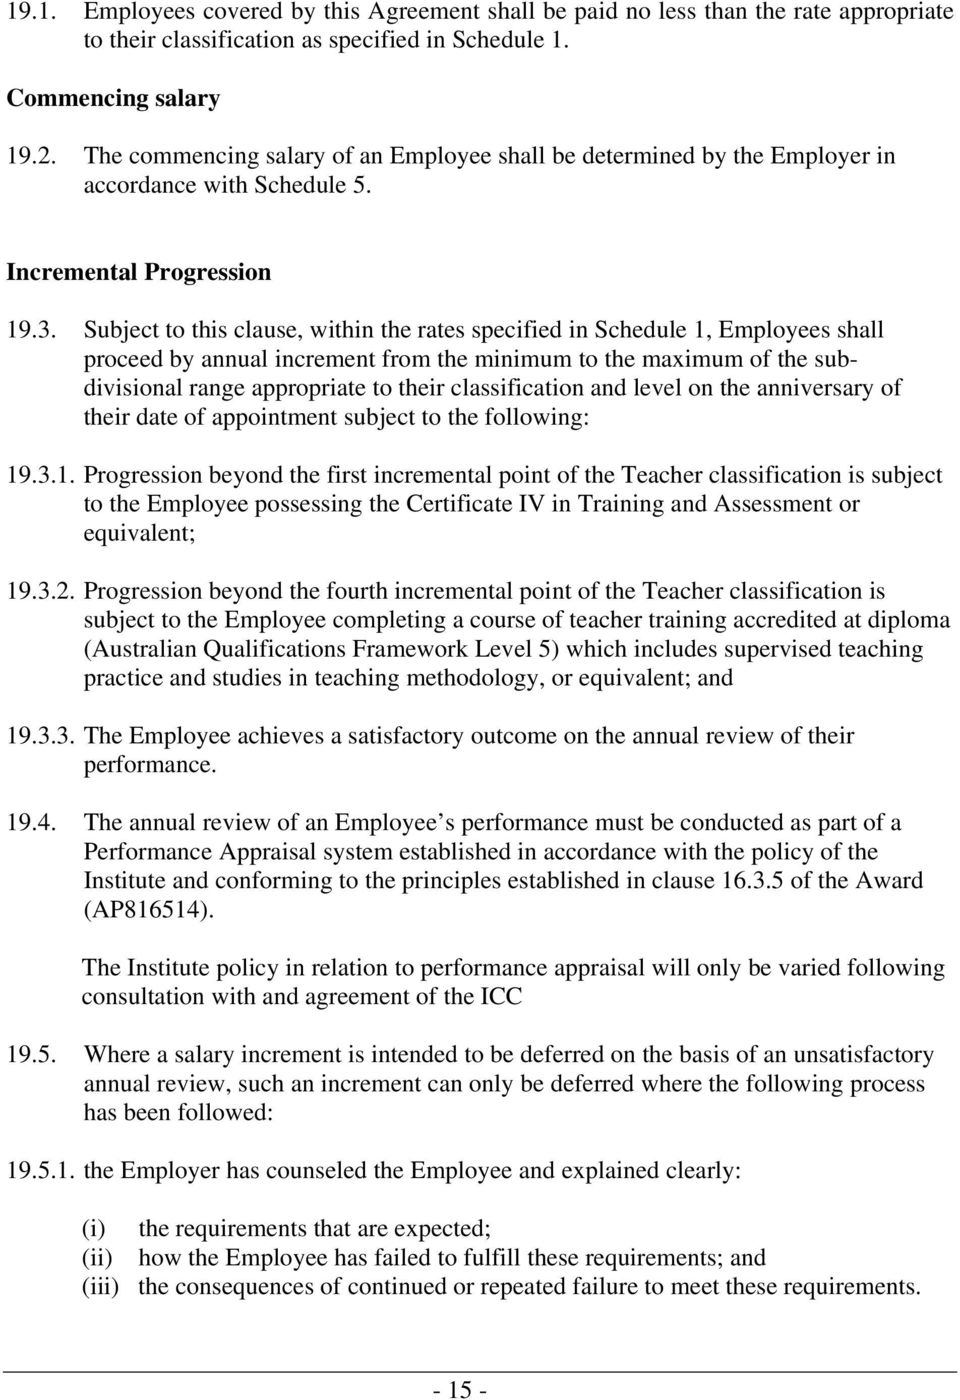 Subject to this clause, within the rates specified in Schedule 1, Employees shall proceed by annual increment from the minimum to the maximum of the subdivisional range appropriate to their